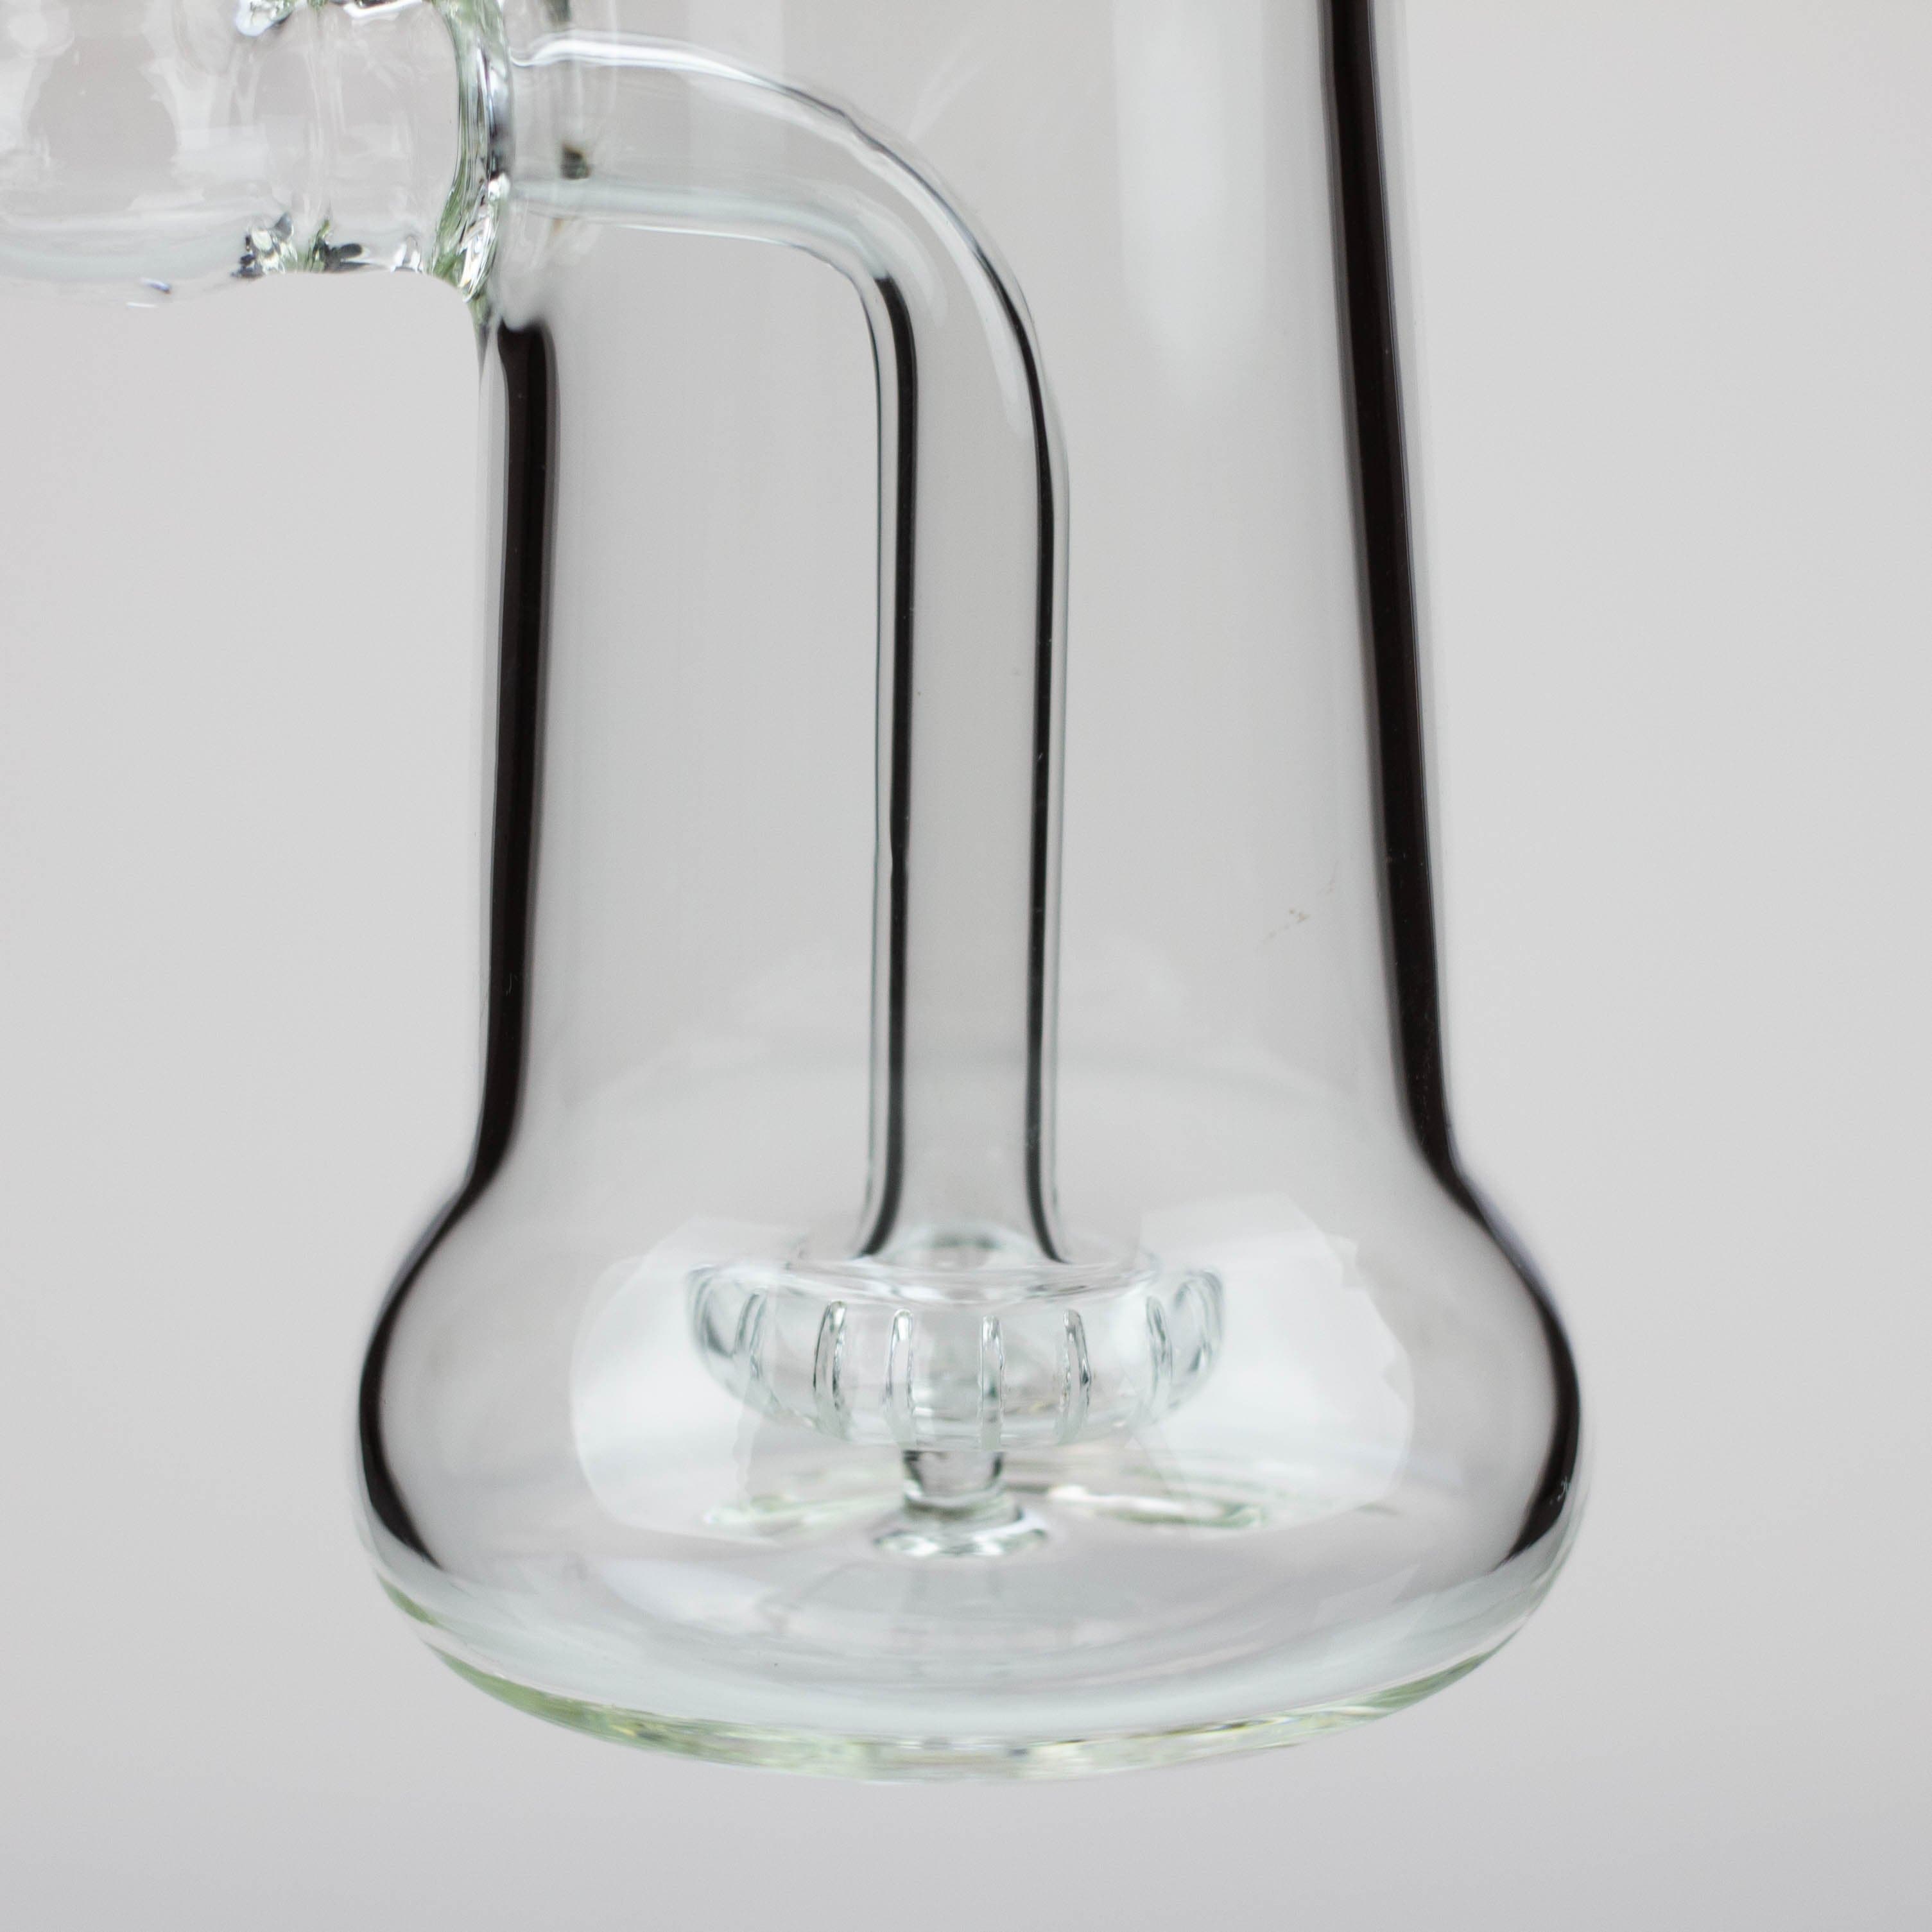 Showerhead diffuser glass pipes 10"_5